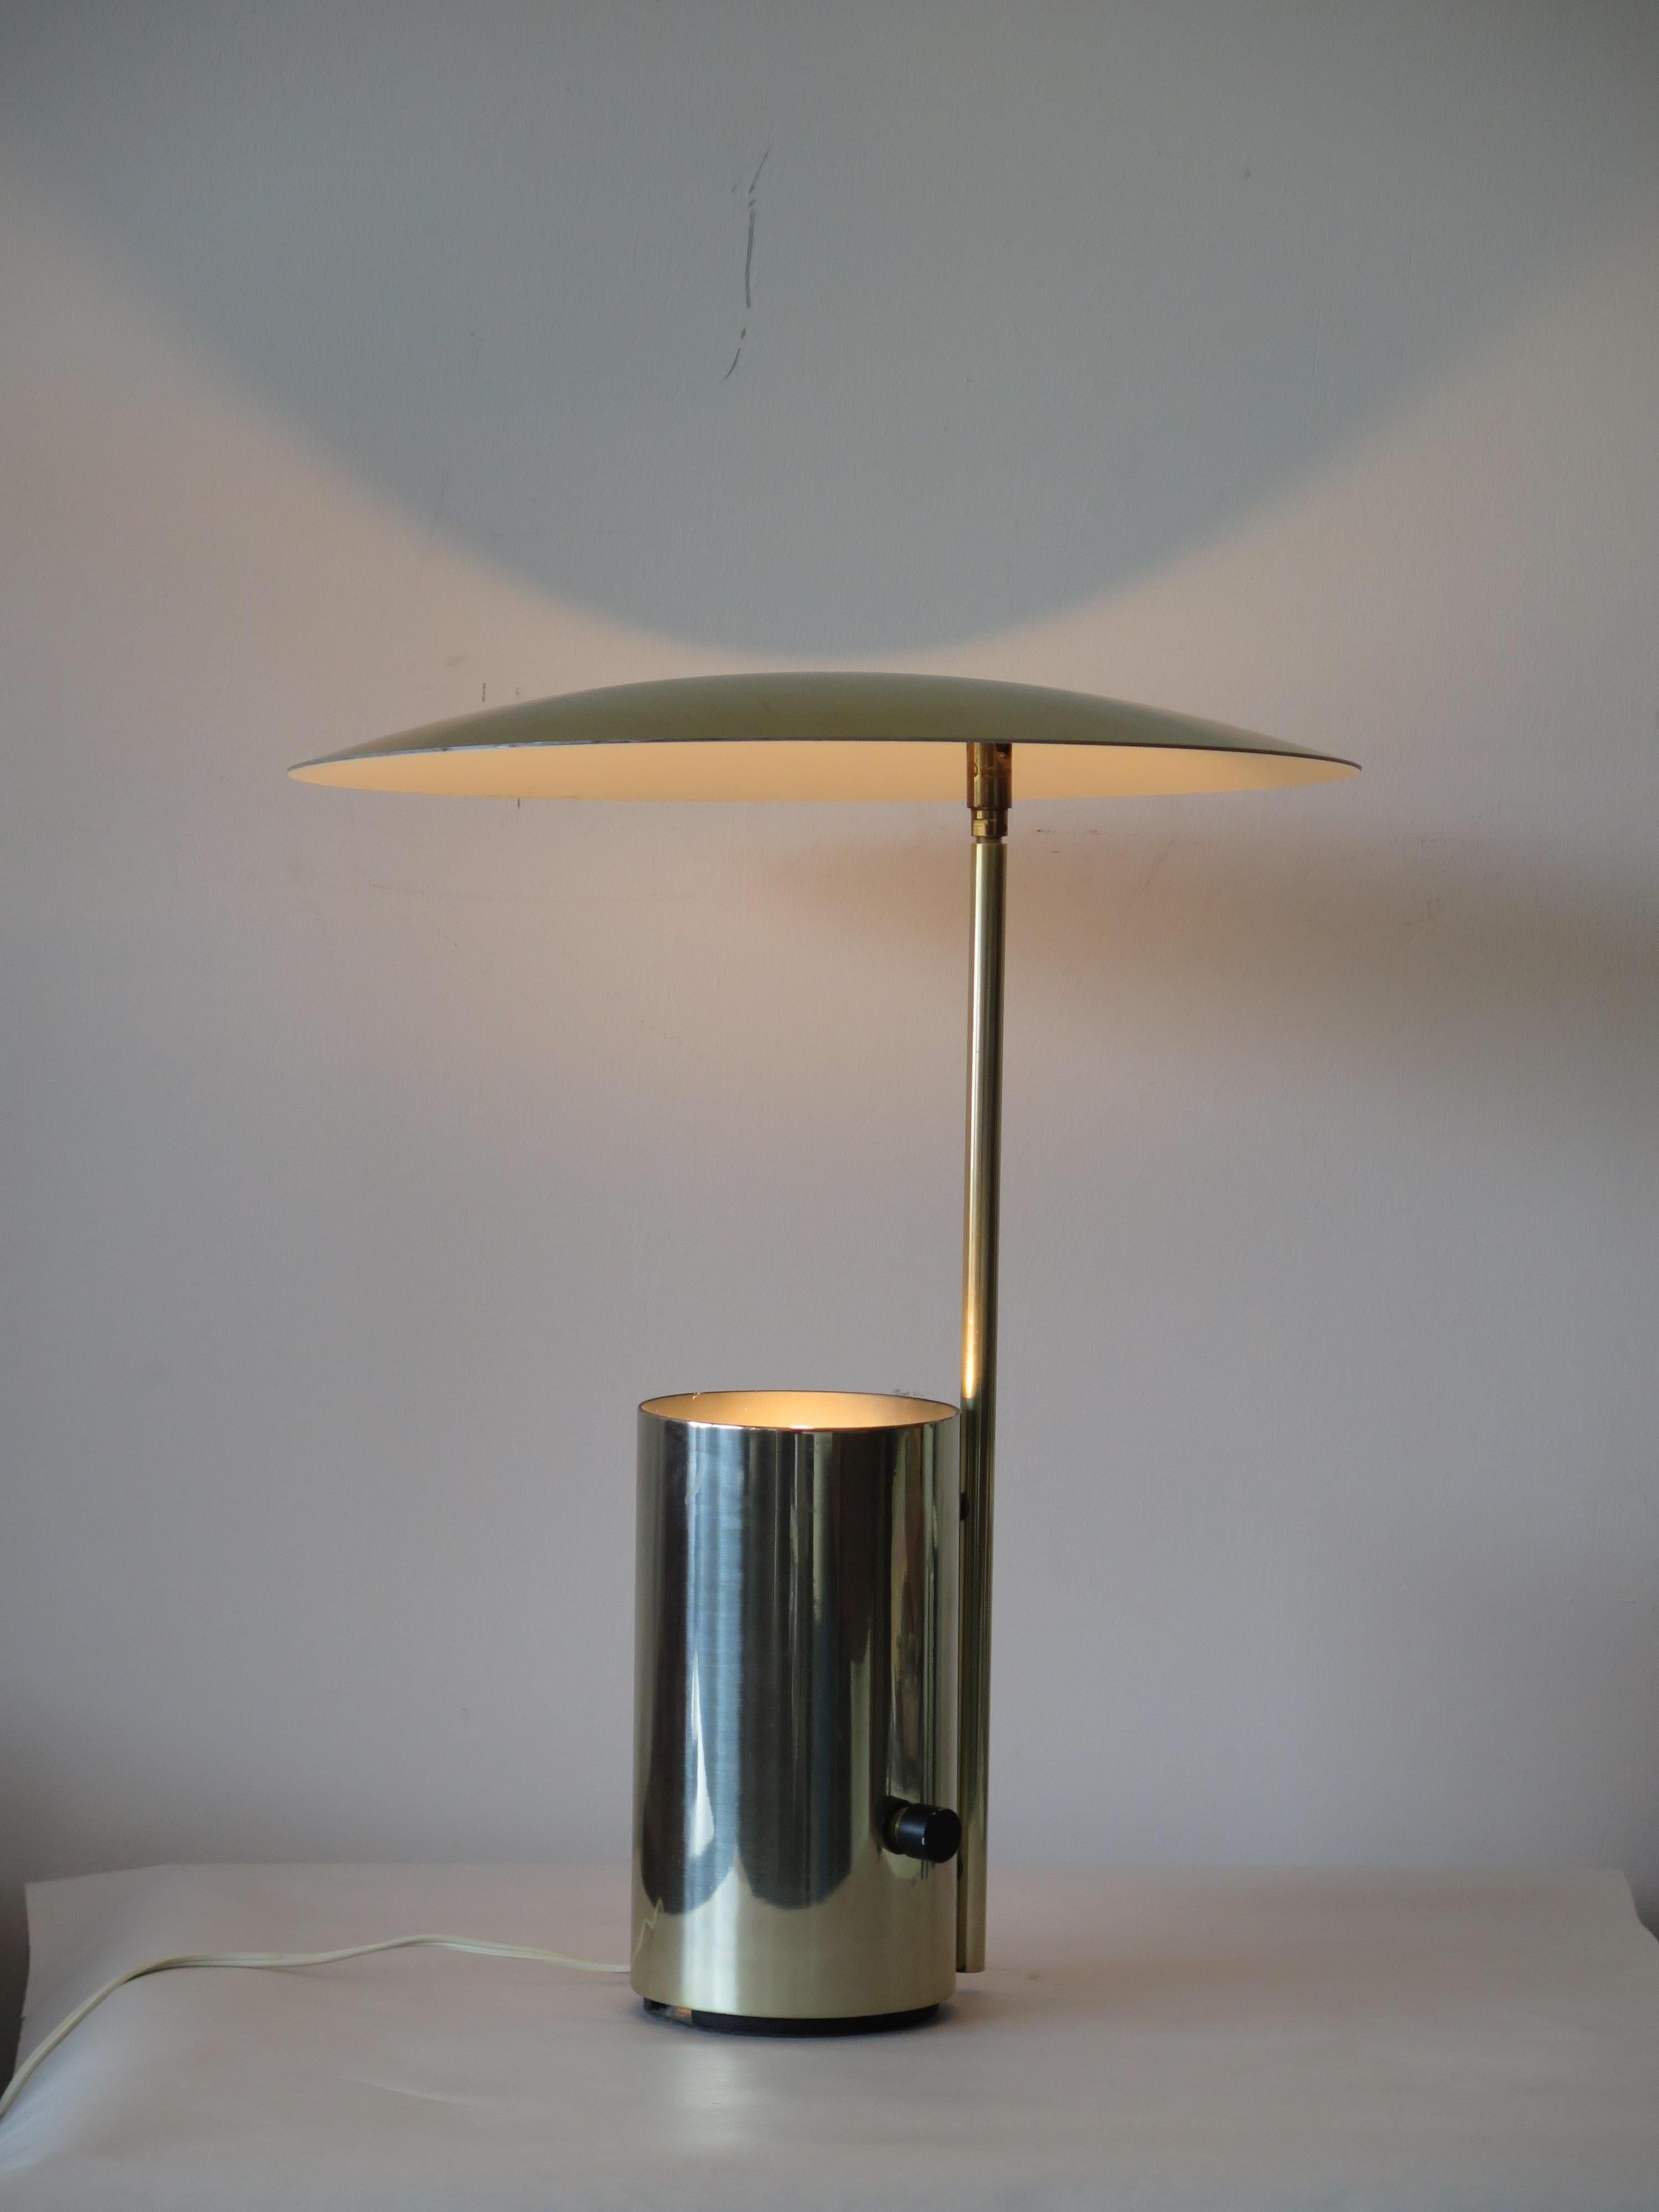 A classic George Nelson Half lamp for Koch Lowy. In brass finish. Very good overall conditon.